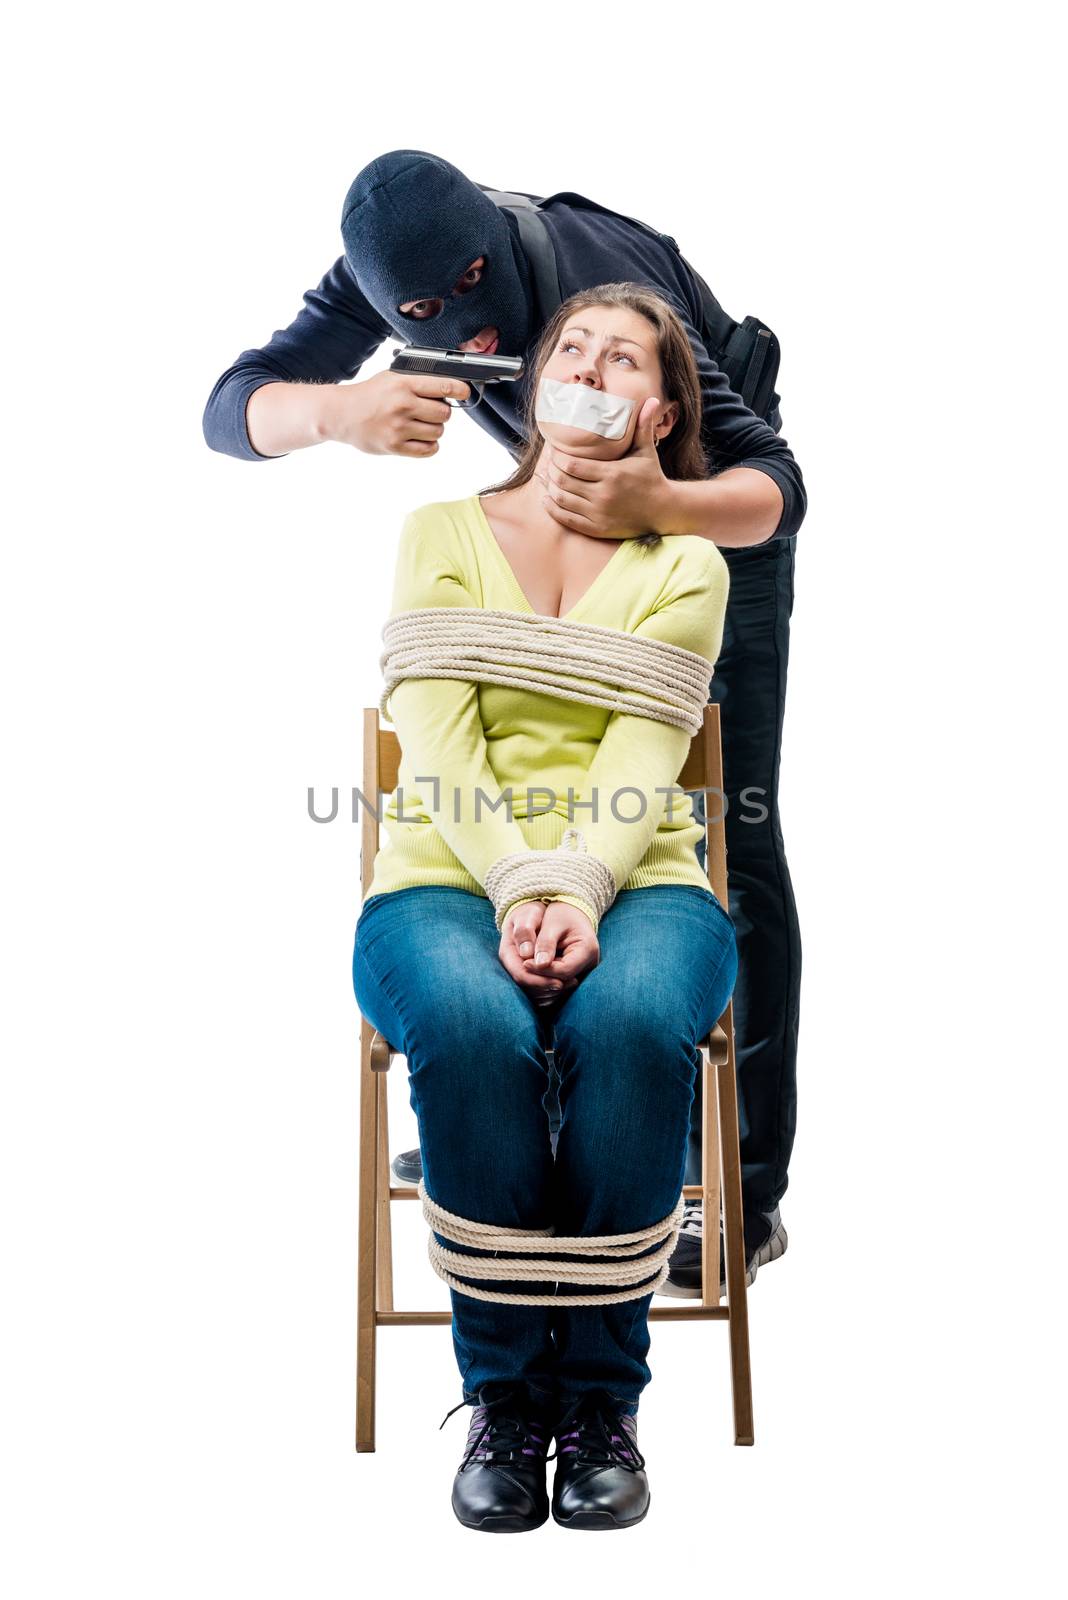 Cruel criminal in a balaclava with arms and girl hostage on a white background